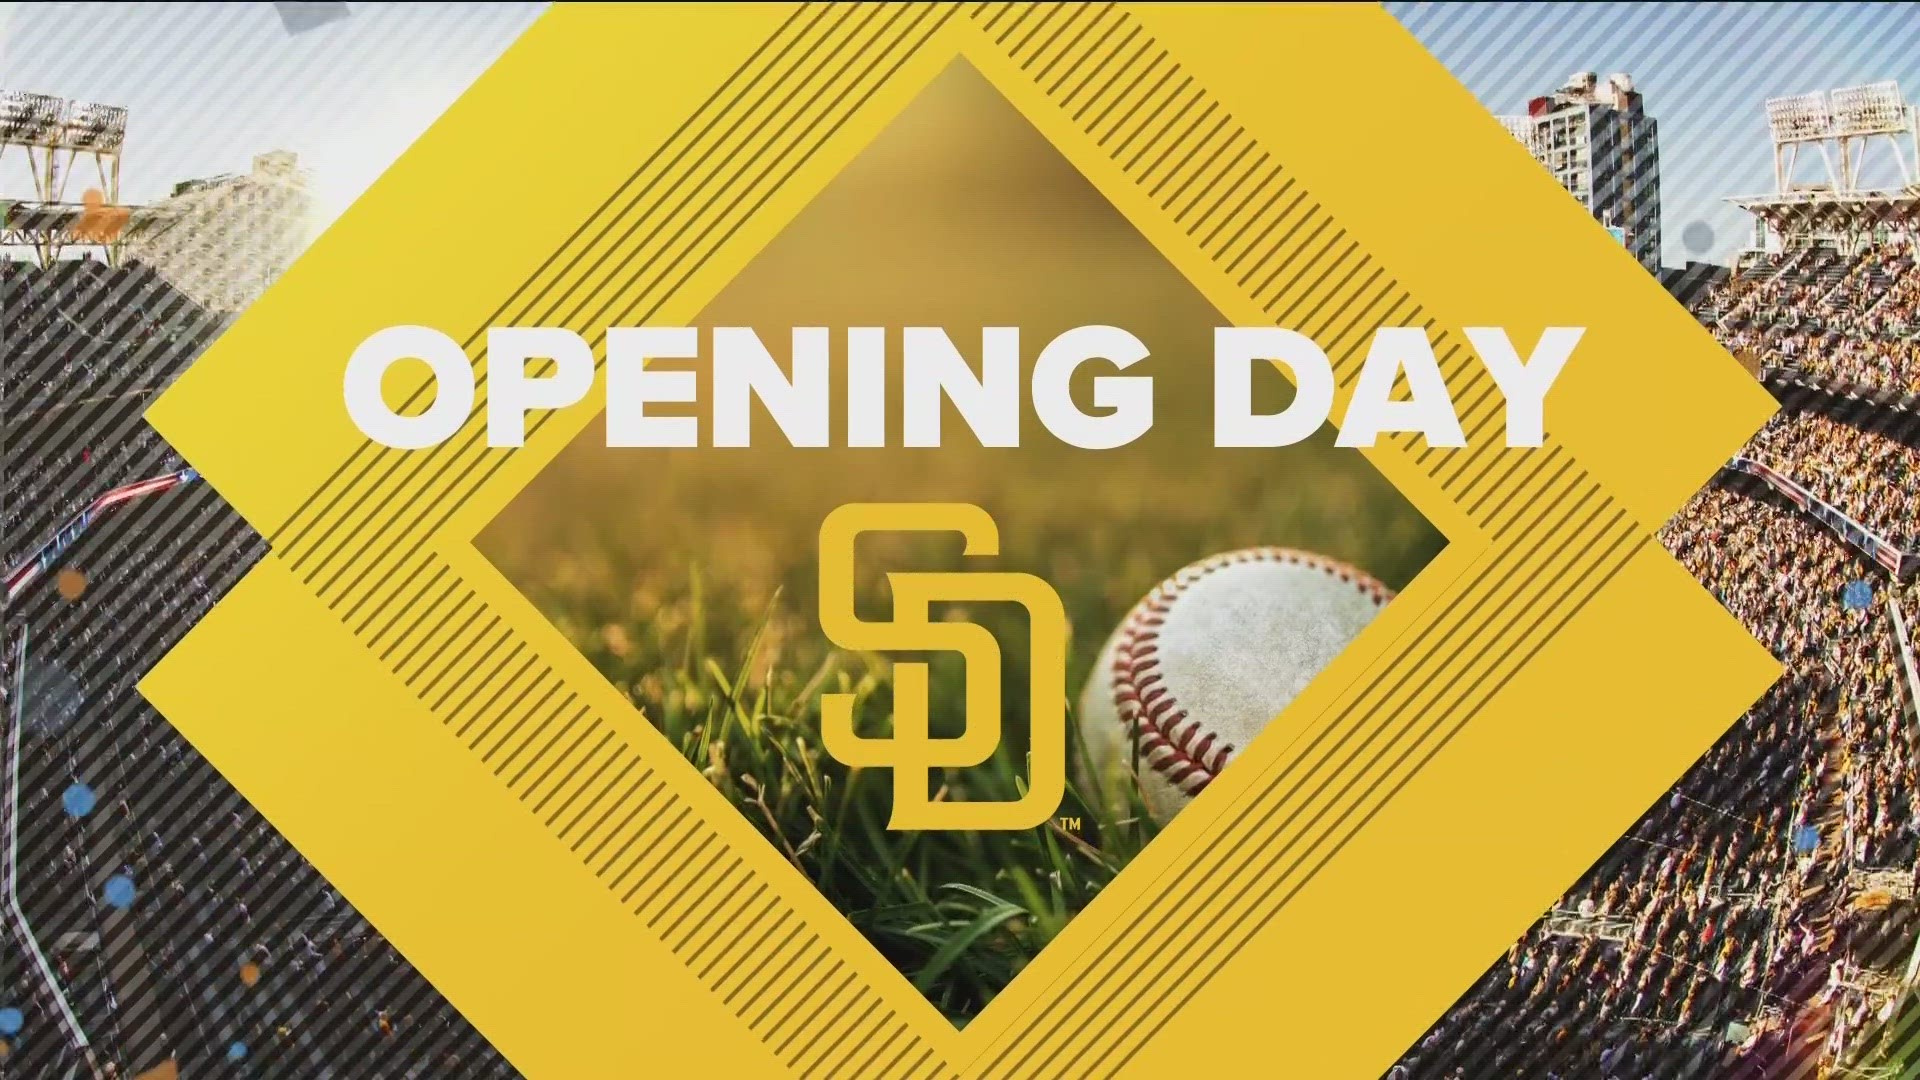 CBS 8 Mornings will be live downtown as the Padres prepare for their first home game. Our coverage will start at 5:00 a.m.